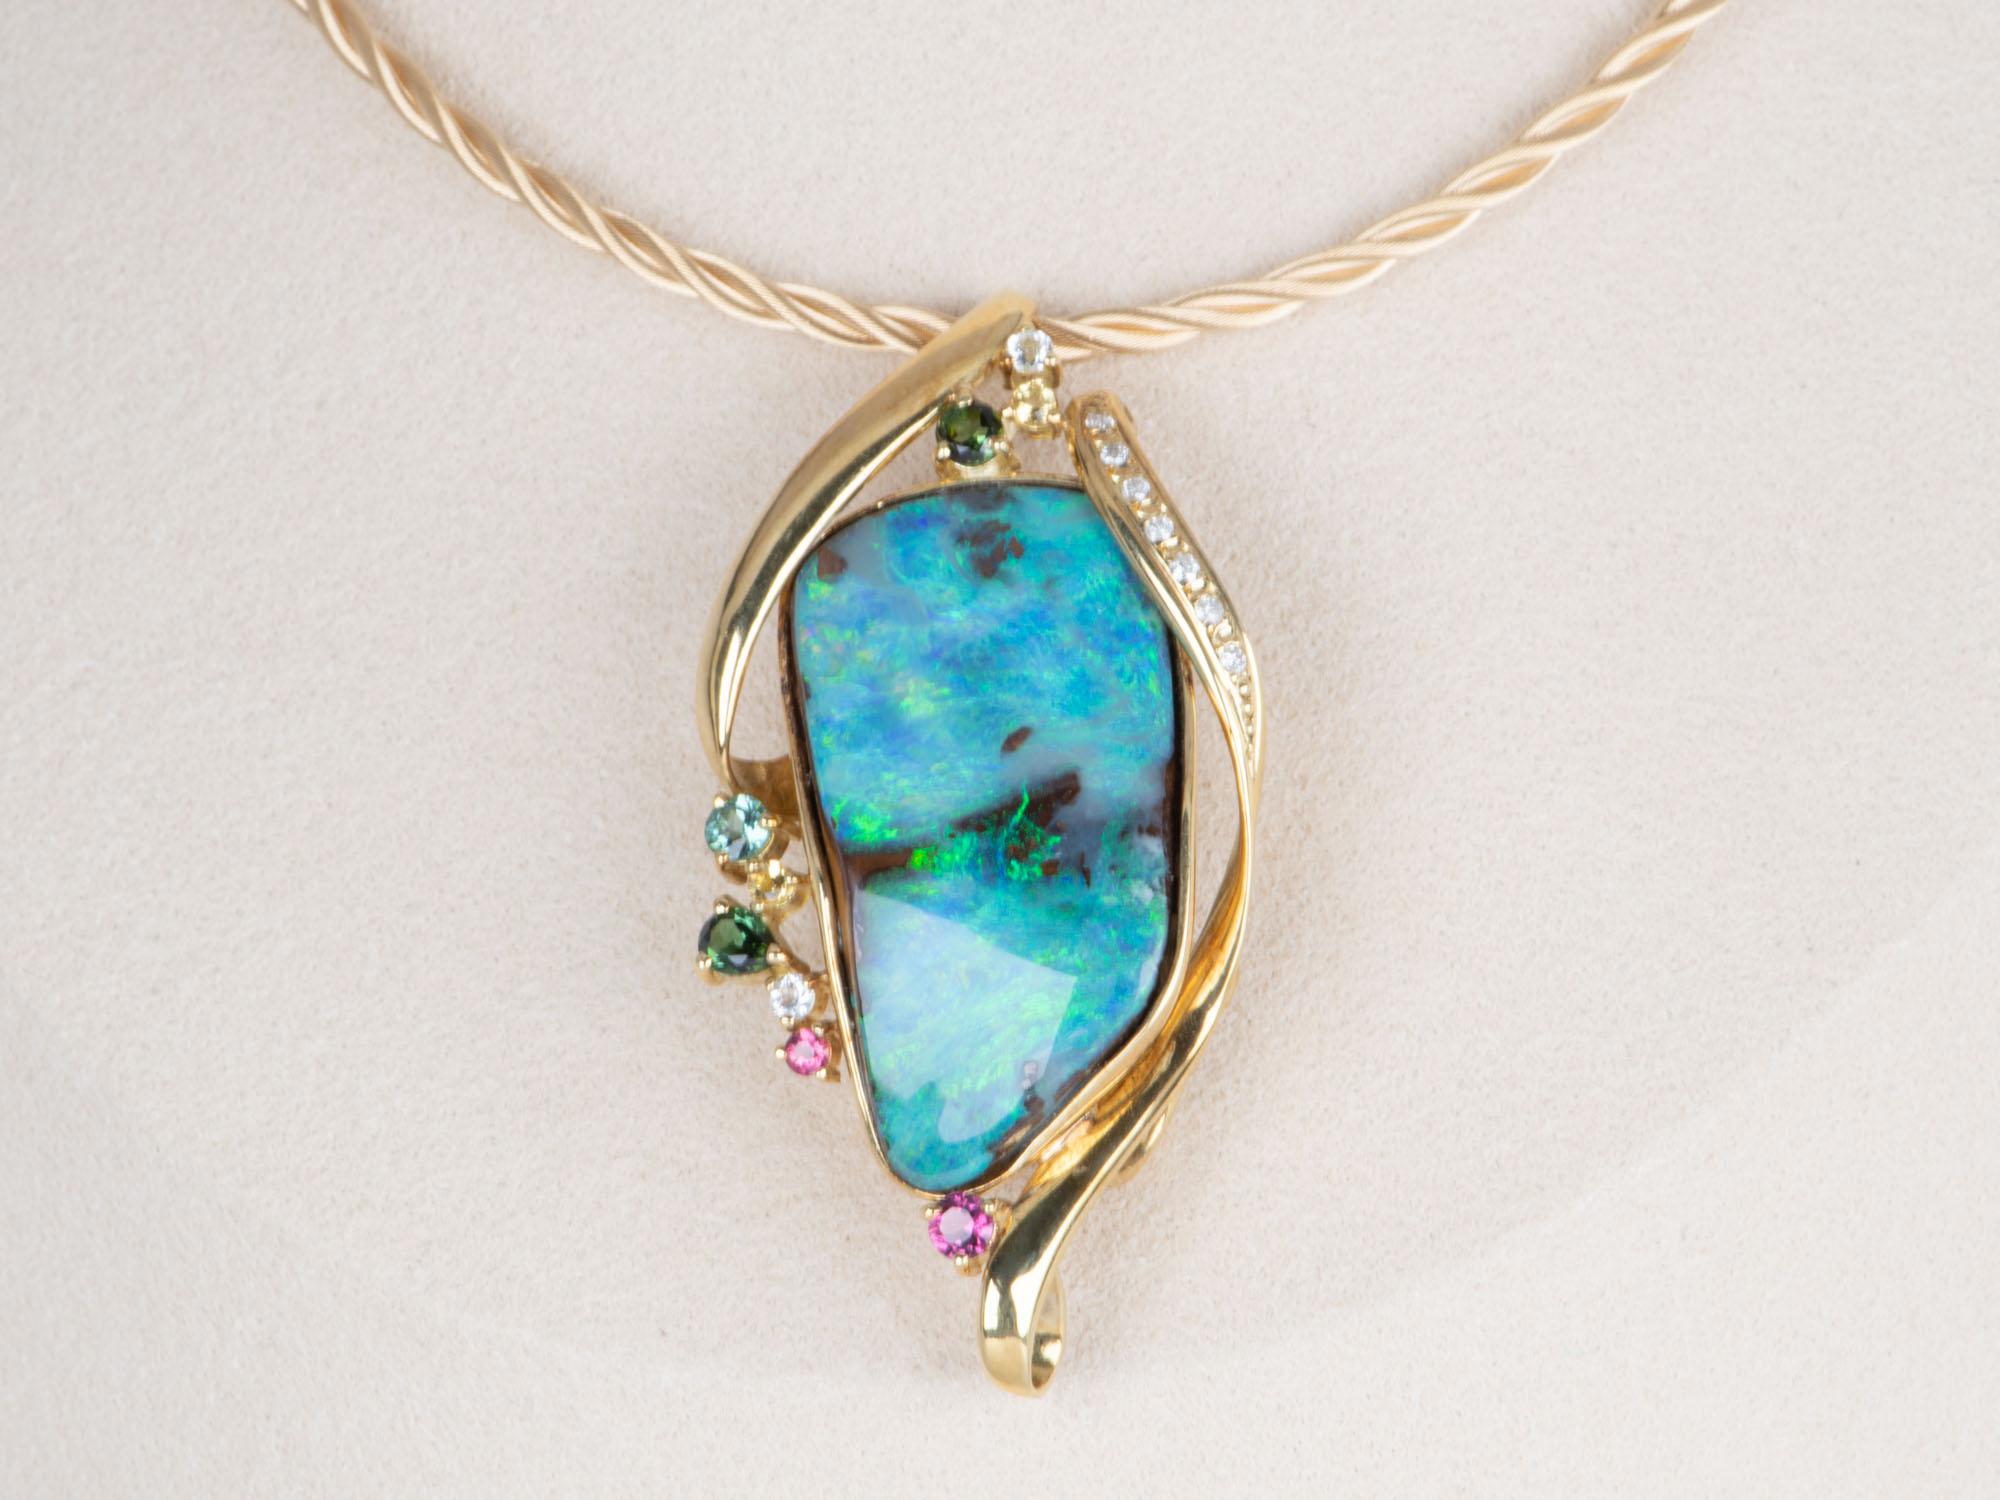  Adorn yourself with this magnificent 33.53ct Australian Boulder Opal pendant brooch combo! This captivating piece features a stunning green blue opal accented by a colorful tourmaline cluster and brilliant diamond border, creating a bold and